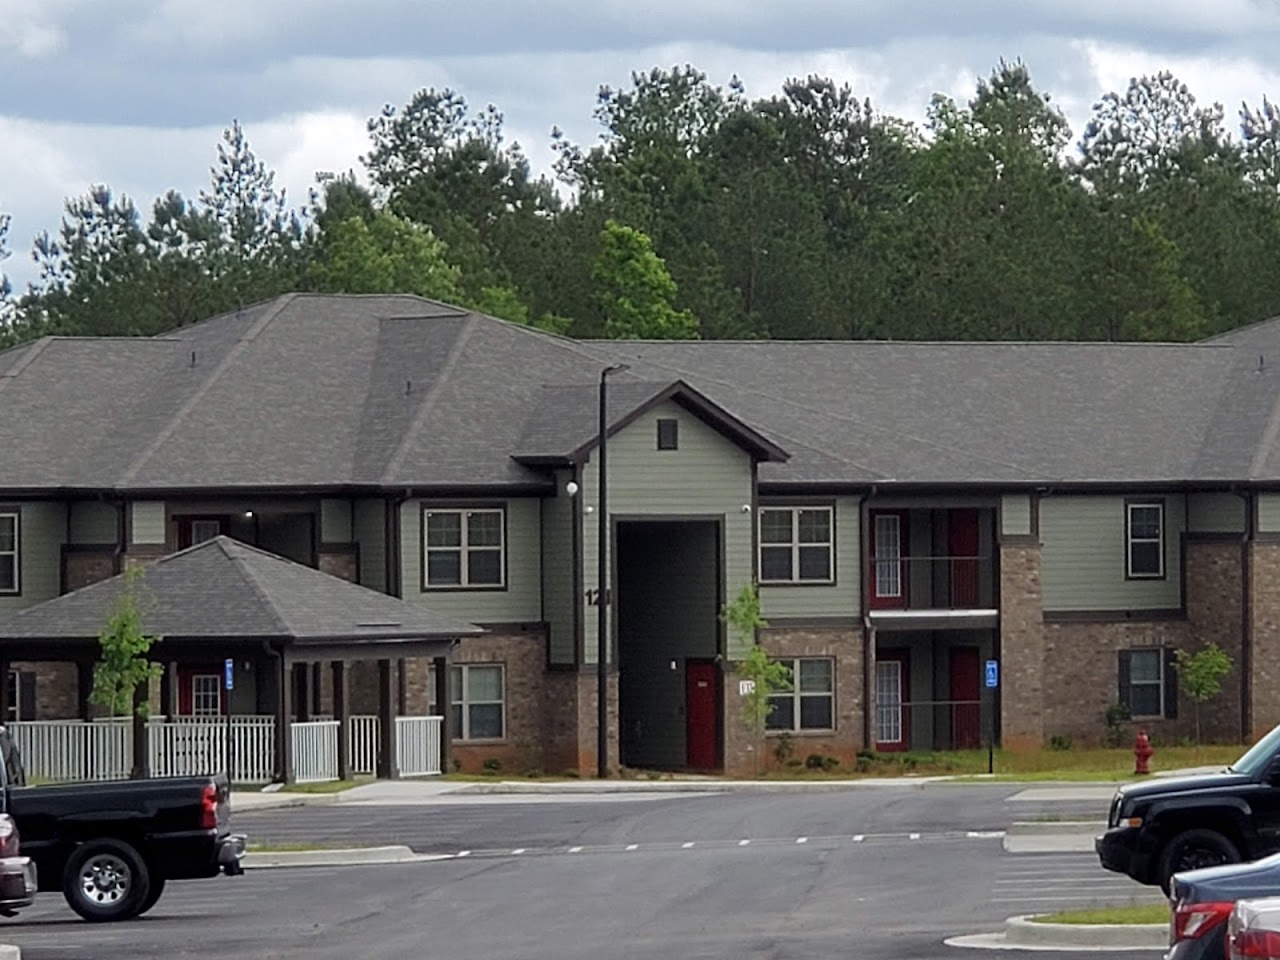 Photo of THE LODGES ON LINCOLN. Affordable housing located at 52 TOWER DRIVE SELMA, AL 36701